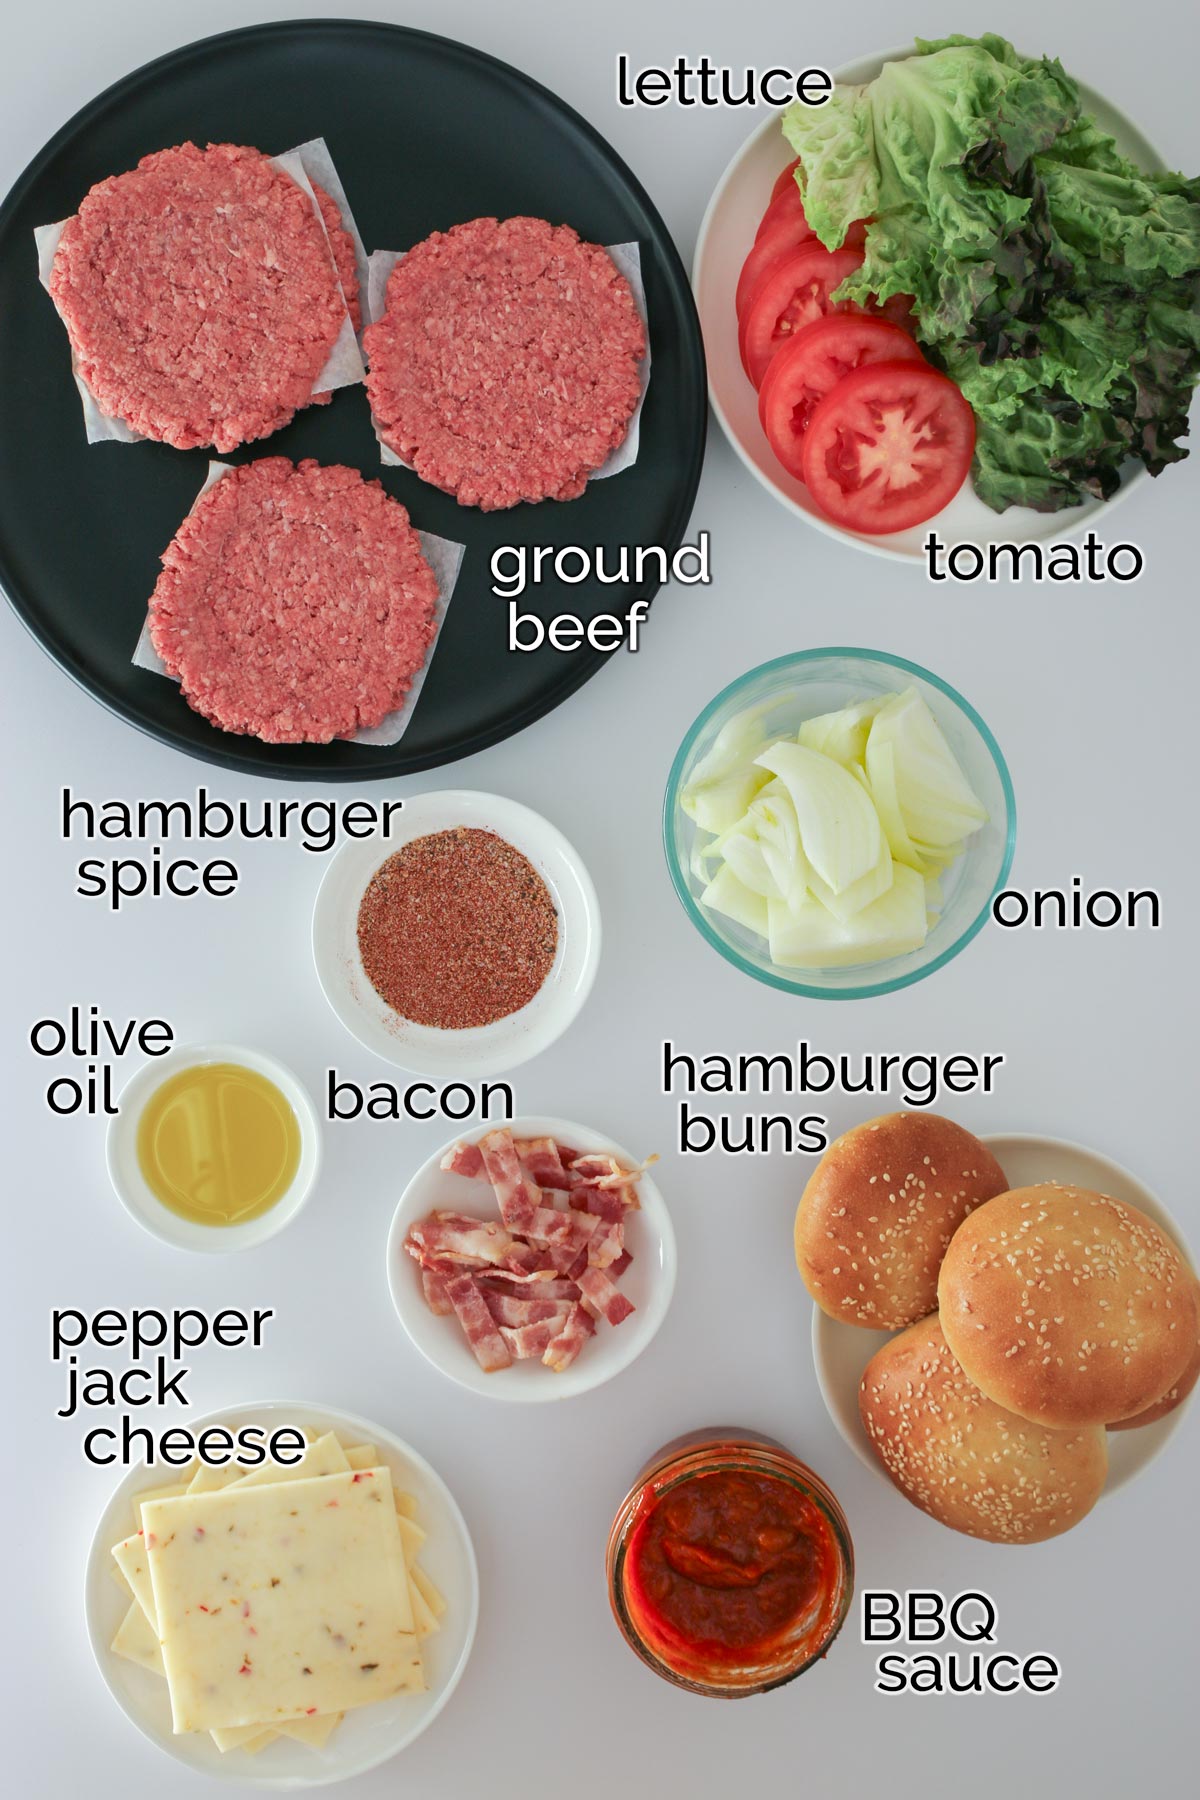 ingredients for bbq bacon burgers, laid out on a white counter.